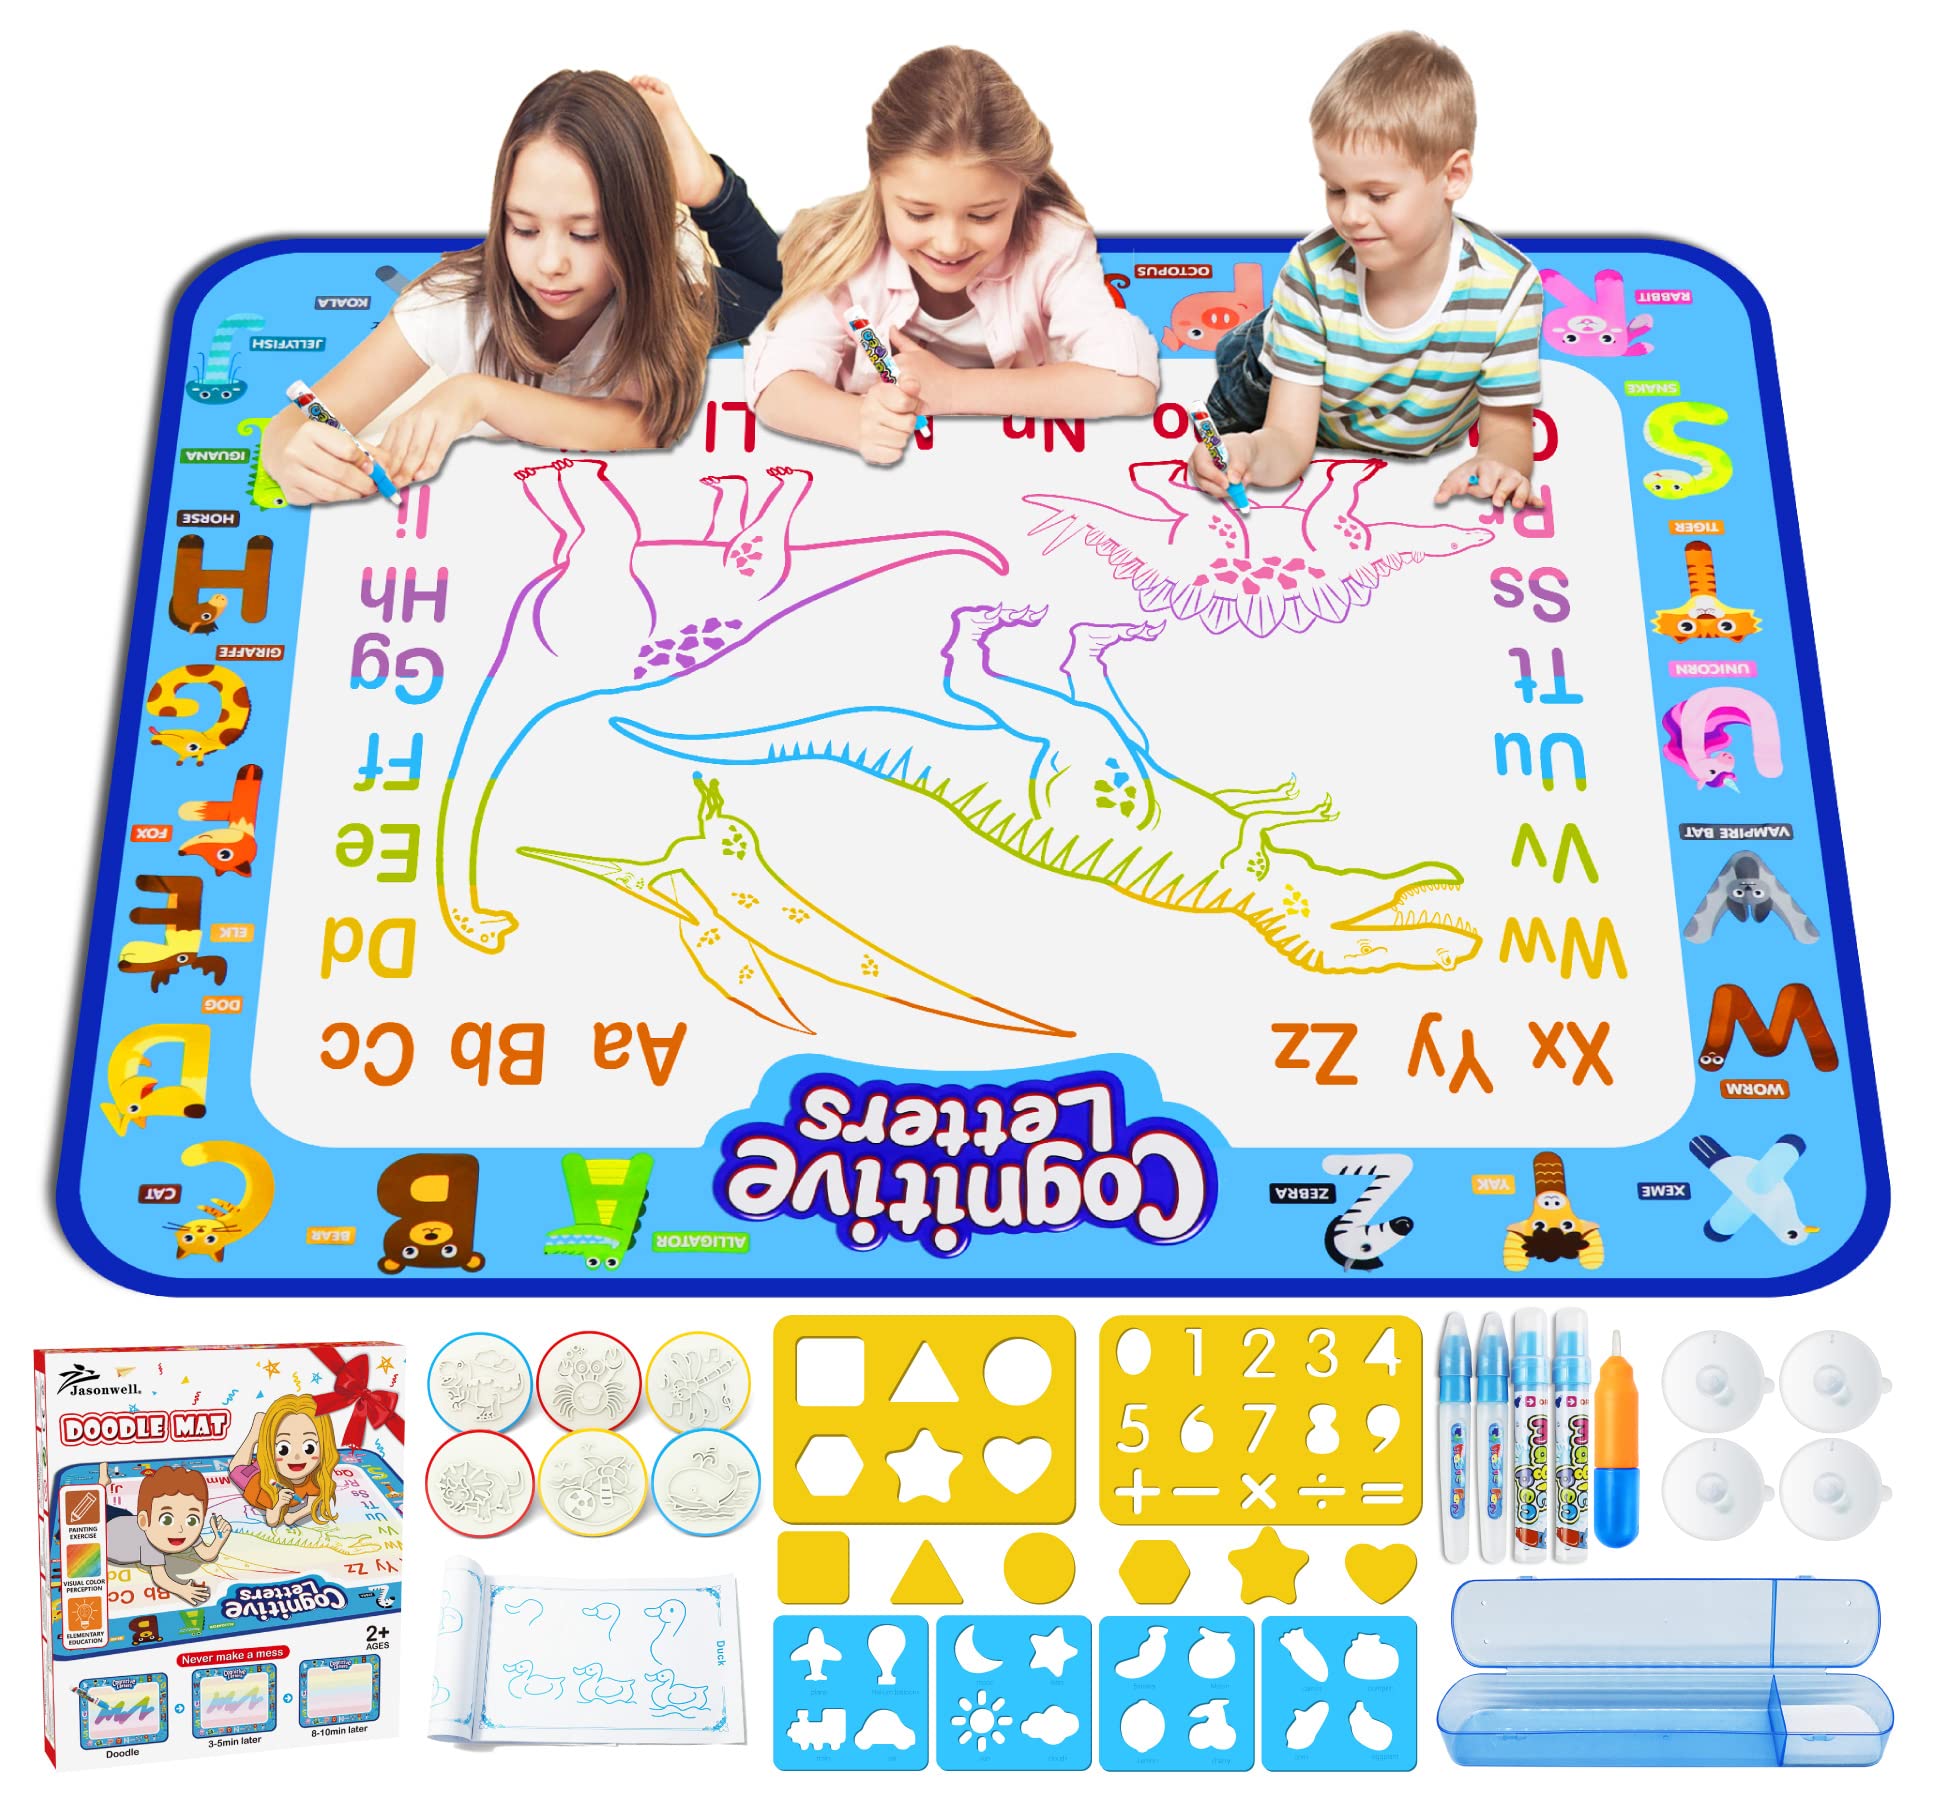 Jasonwell Aqua Water Doodle Mat 40 X 32 Inches Extra Large Magic Drawing Doodling Mat Coloring Mat Educational Toys Gifts for Kids Toddlers Boys Girls Age 2 3 4 5 6 7 8 Year Old (Alphabet)